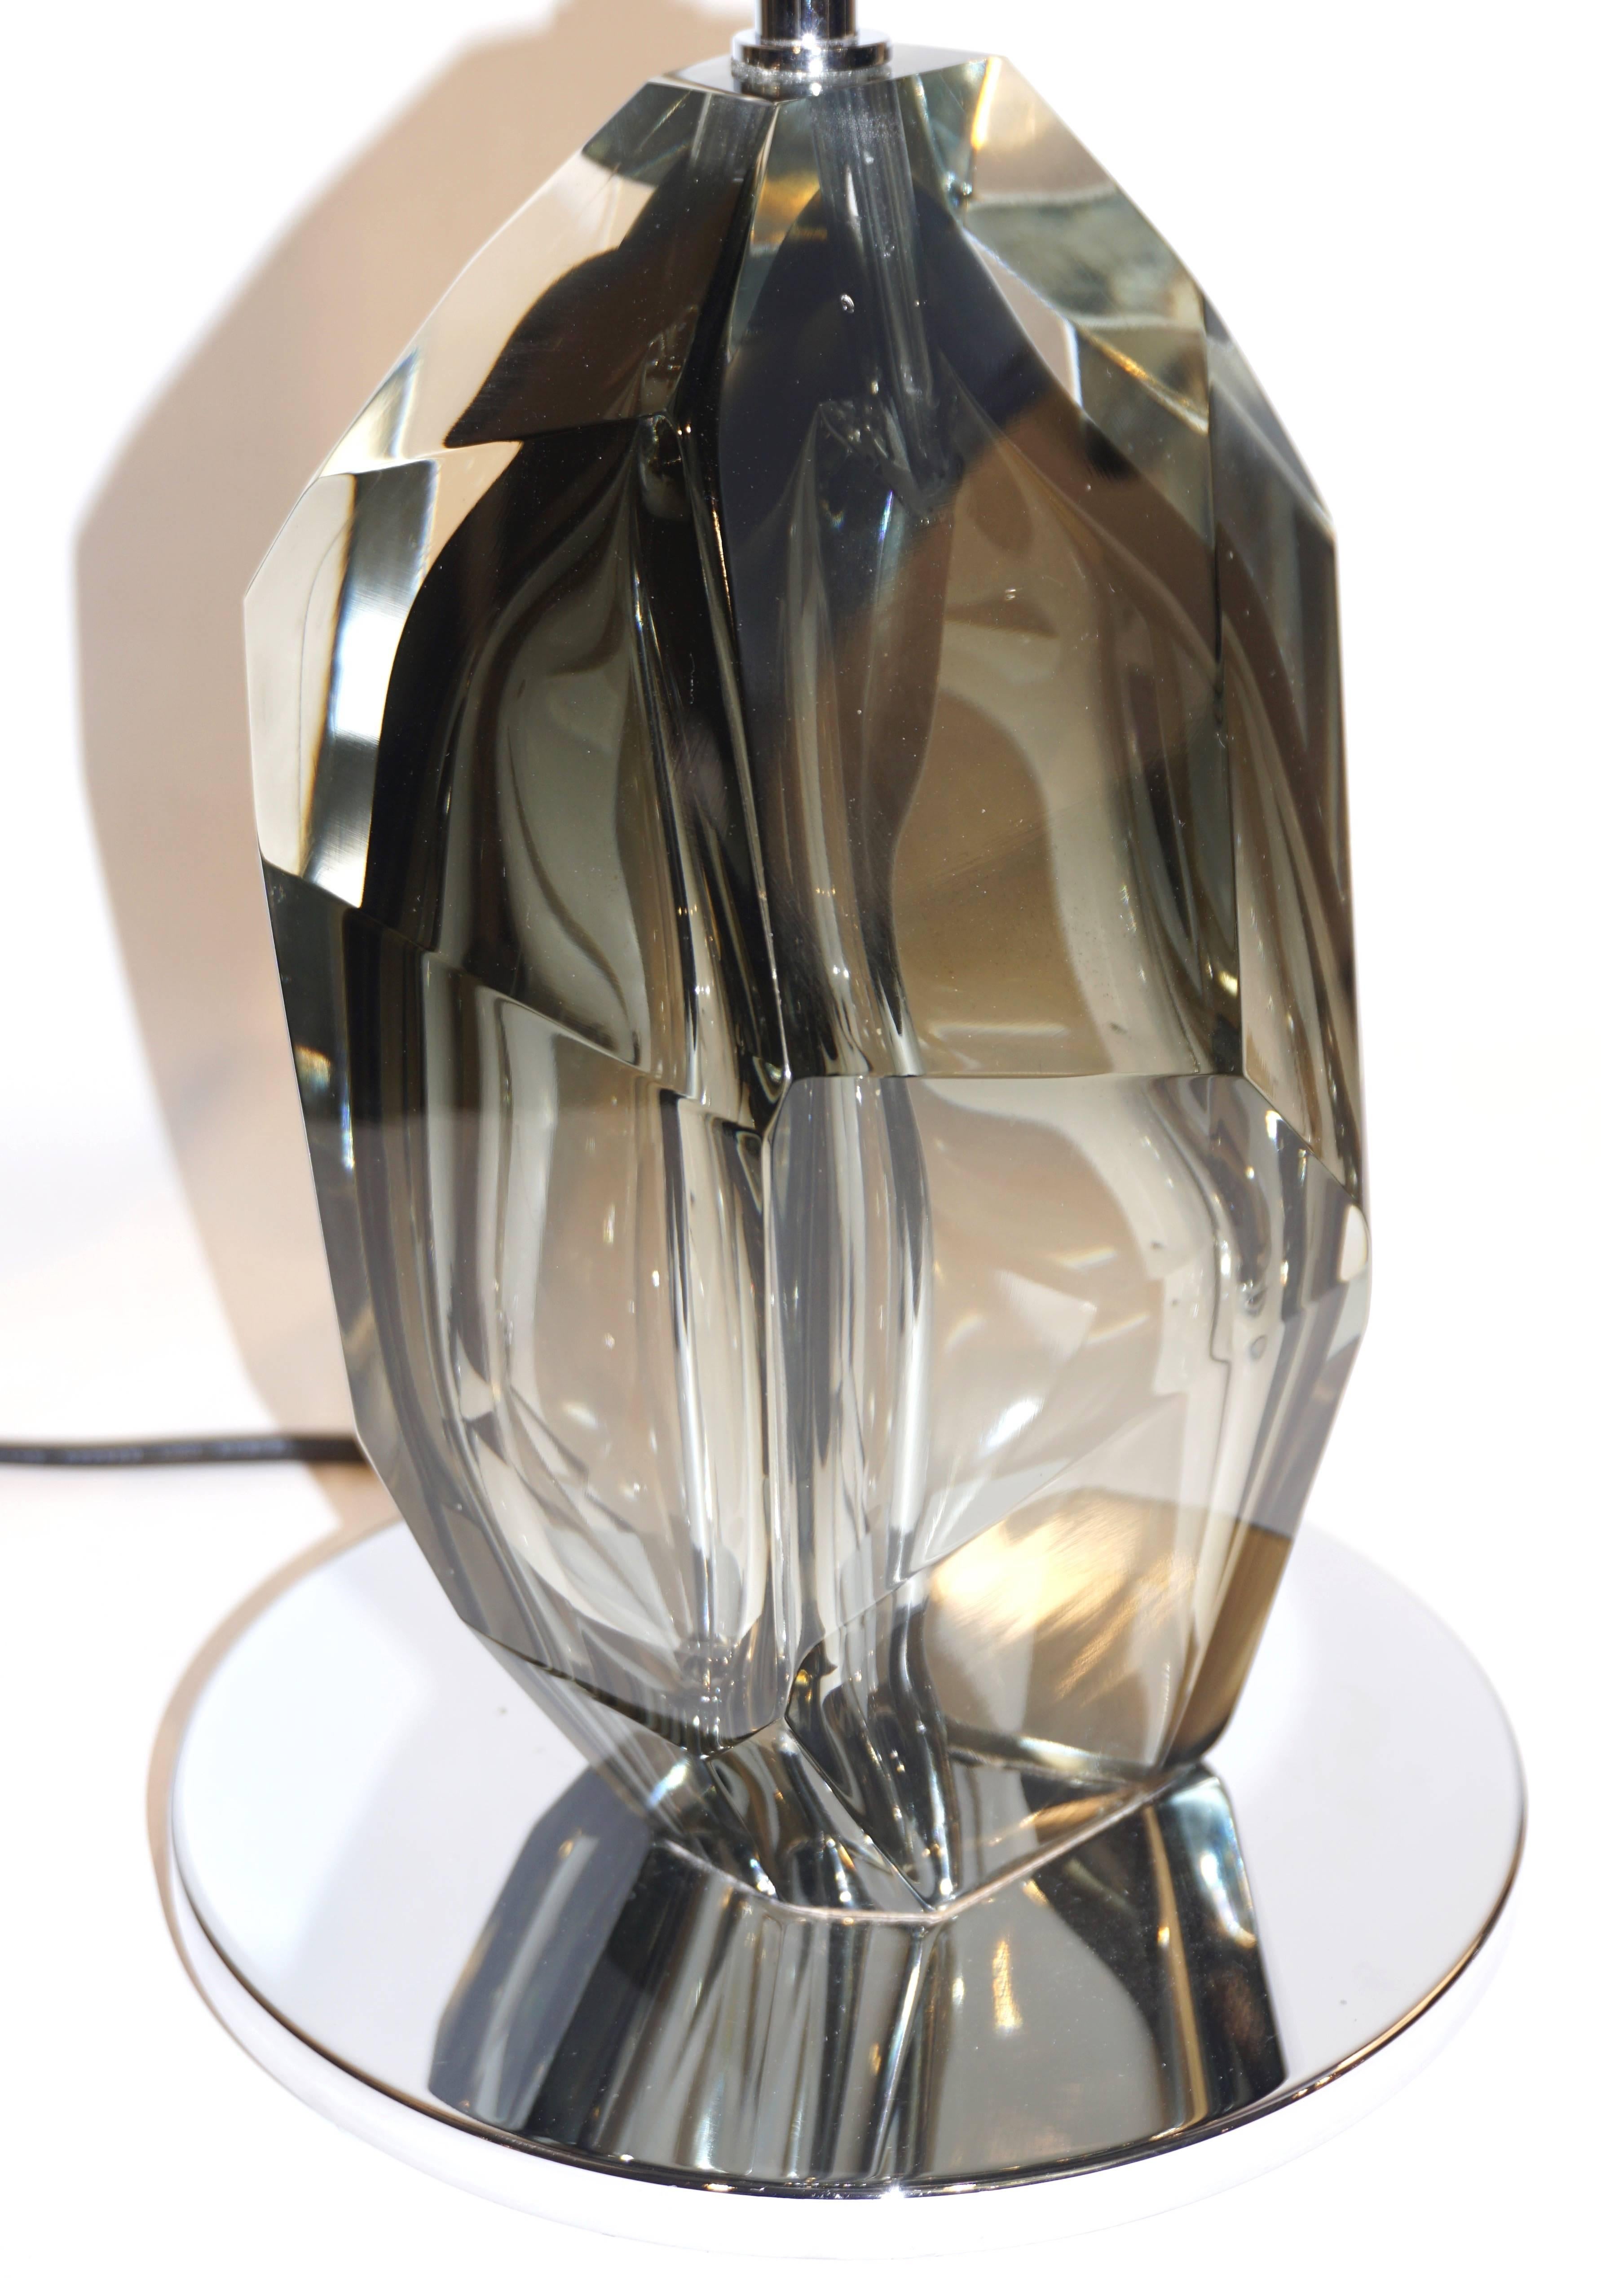 Contemporary made in italy pair of table lamps signed by Alberto Donà Studio of organic design, high quality of execution, entirely handcrafted and hand polished, the heavy solid Murano glass bodies in a sophisticated smoked glass tint are rock